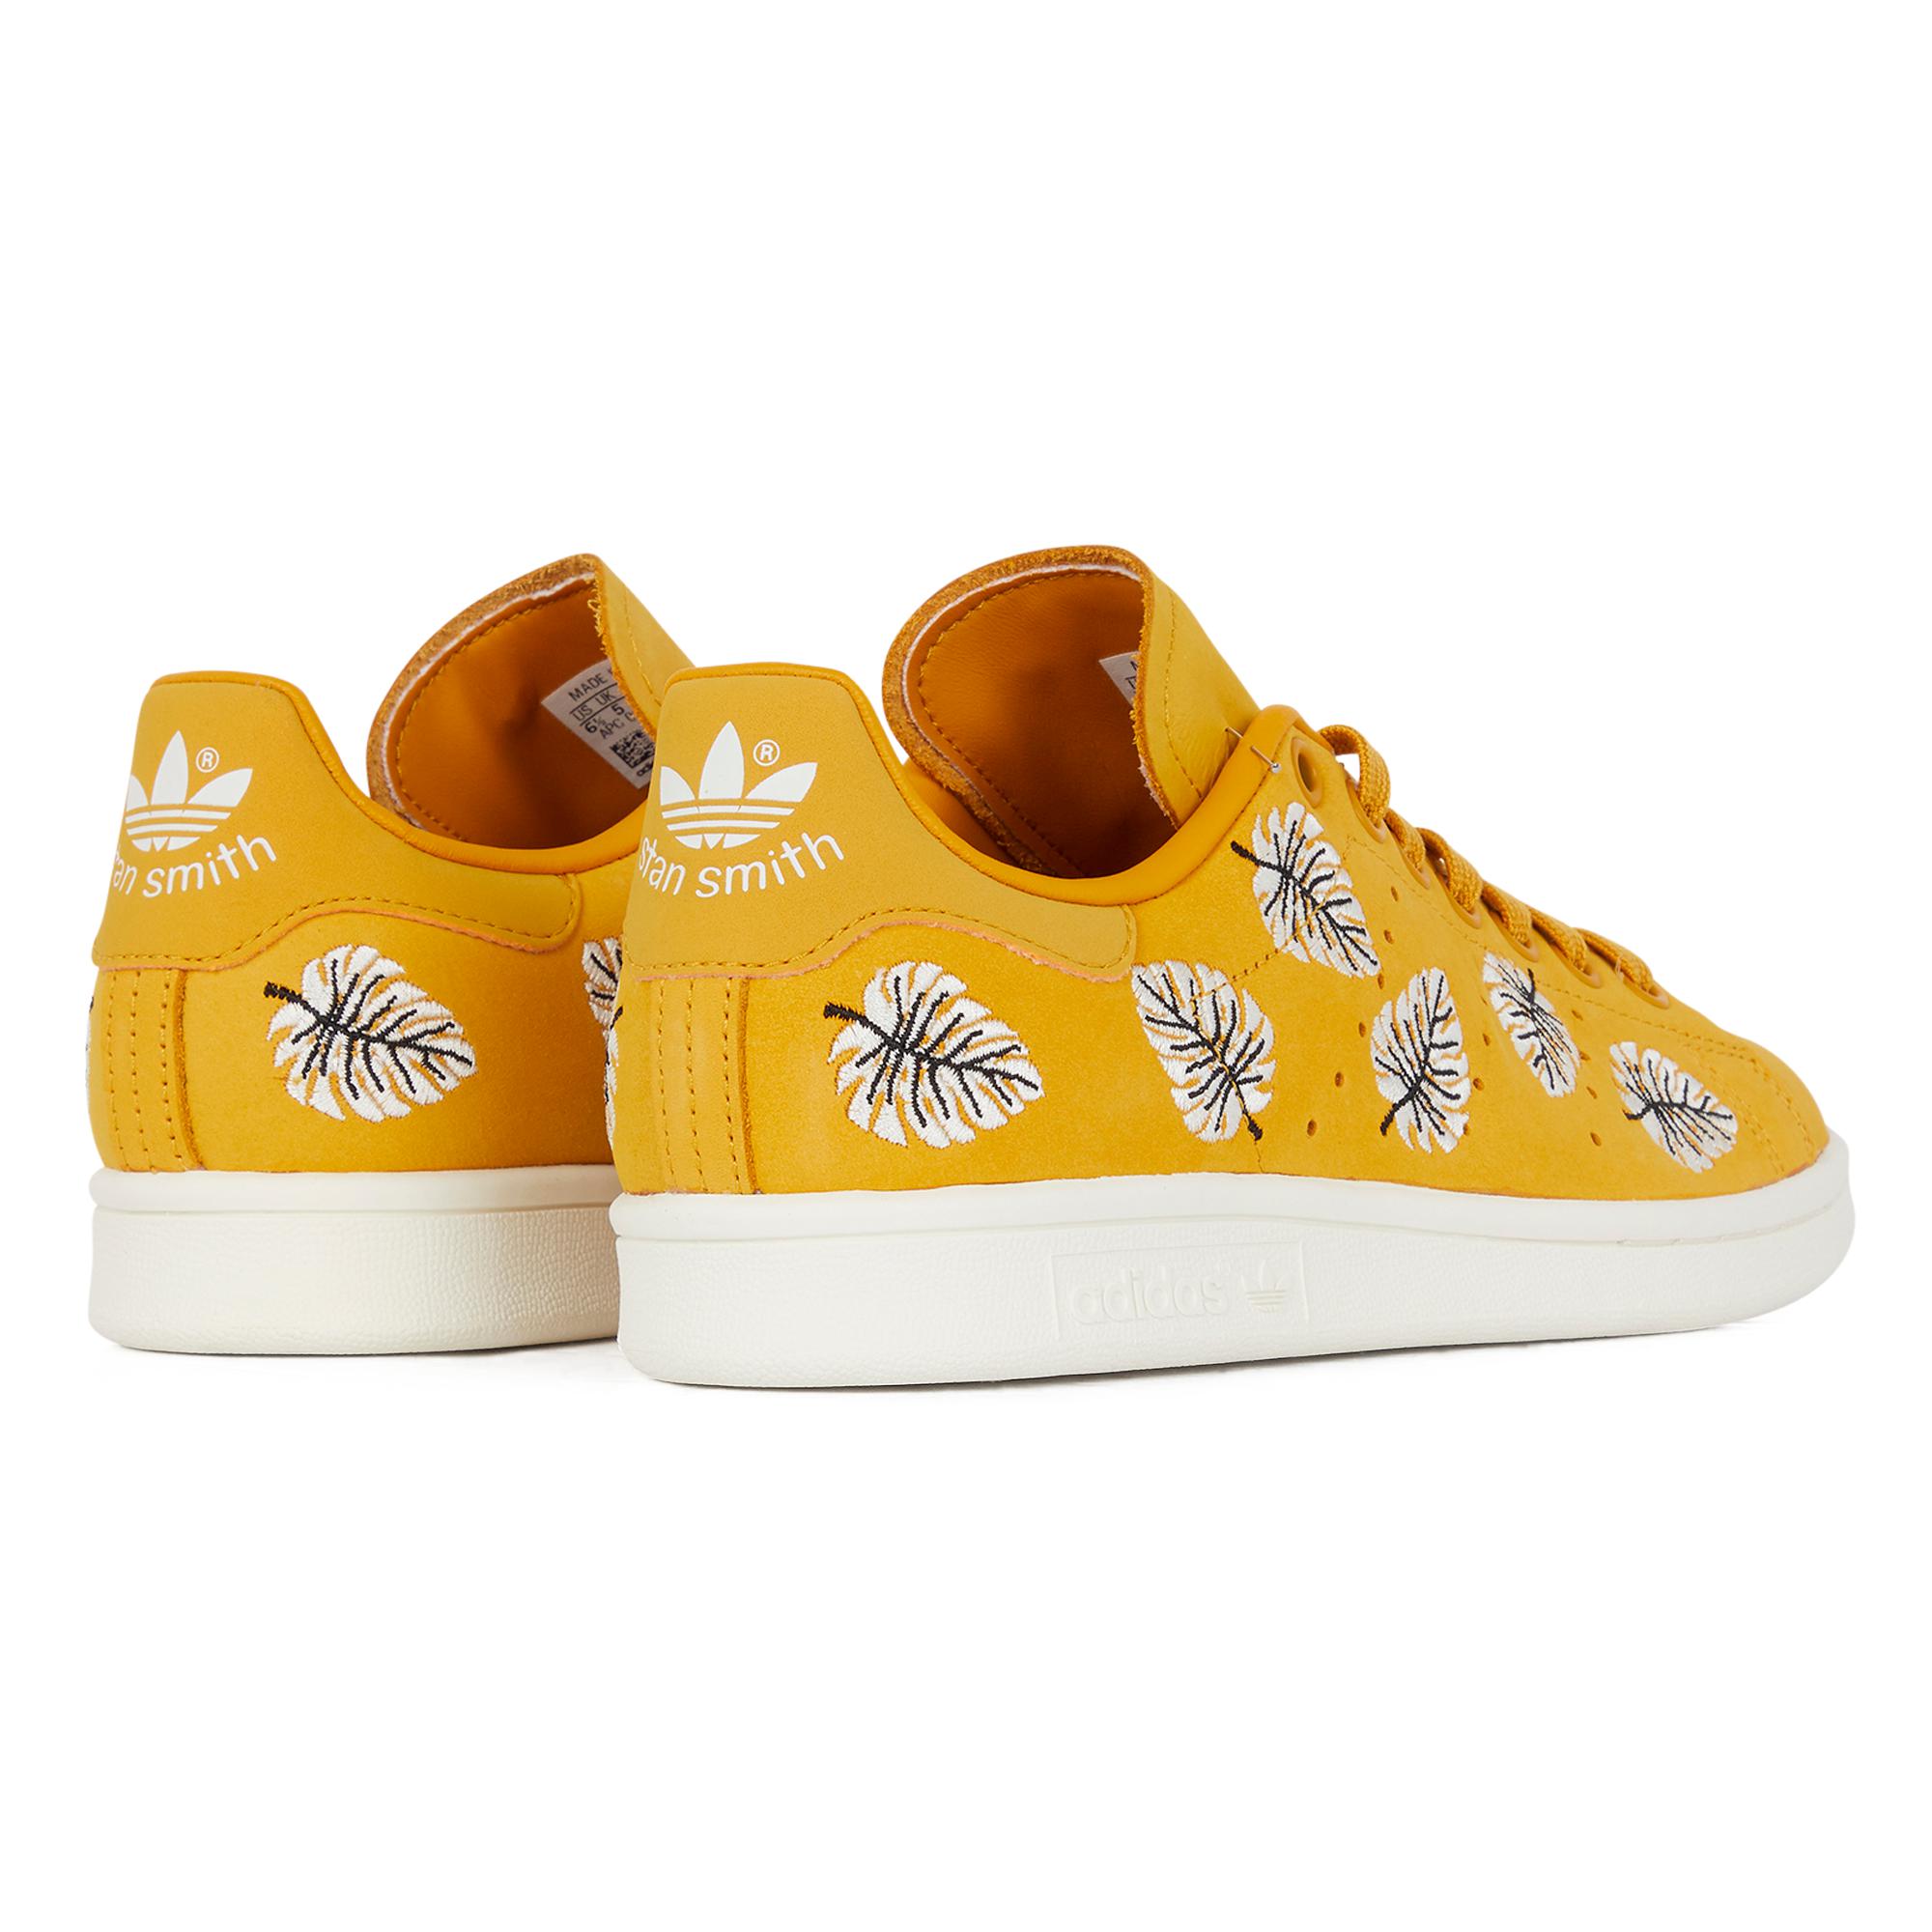 Adidas Stan Smith Ecaille Homme Jaune Deals With, 51% OFF |  evanstoncinci.org